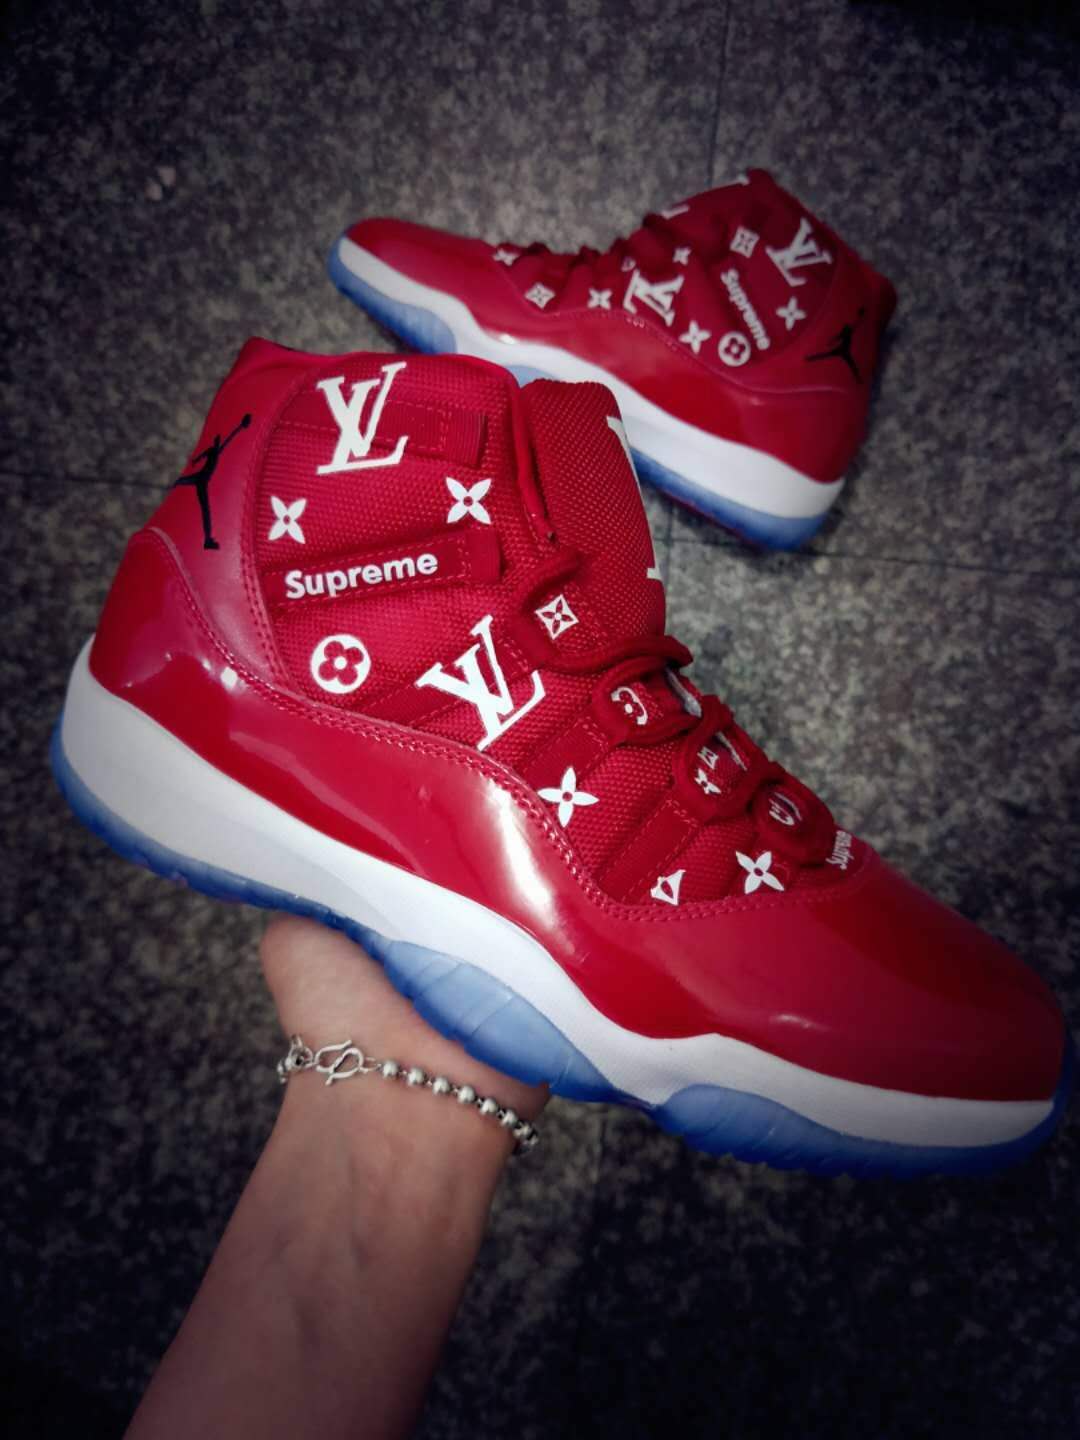 New Air Jordan 11 Hot Red Ice Sole Lover Shoes - Click Image to Close